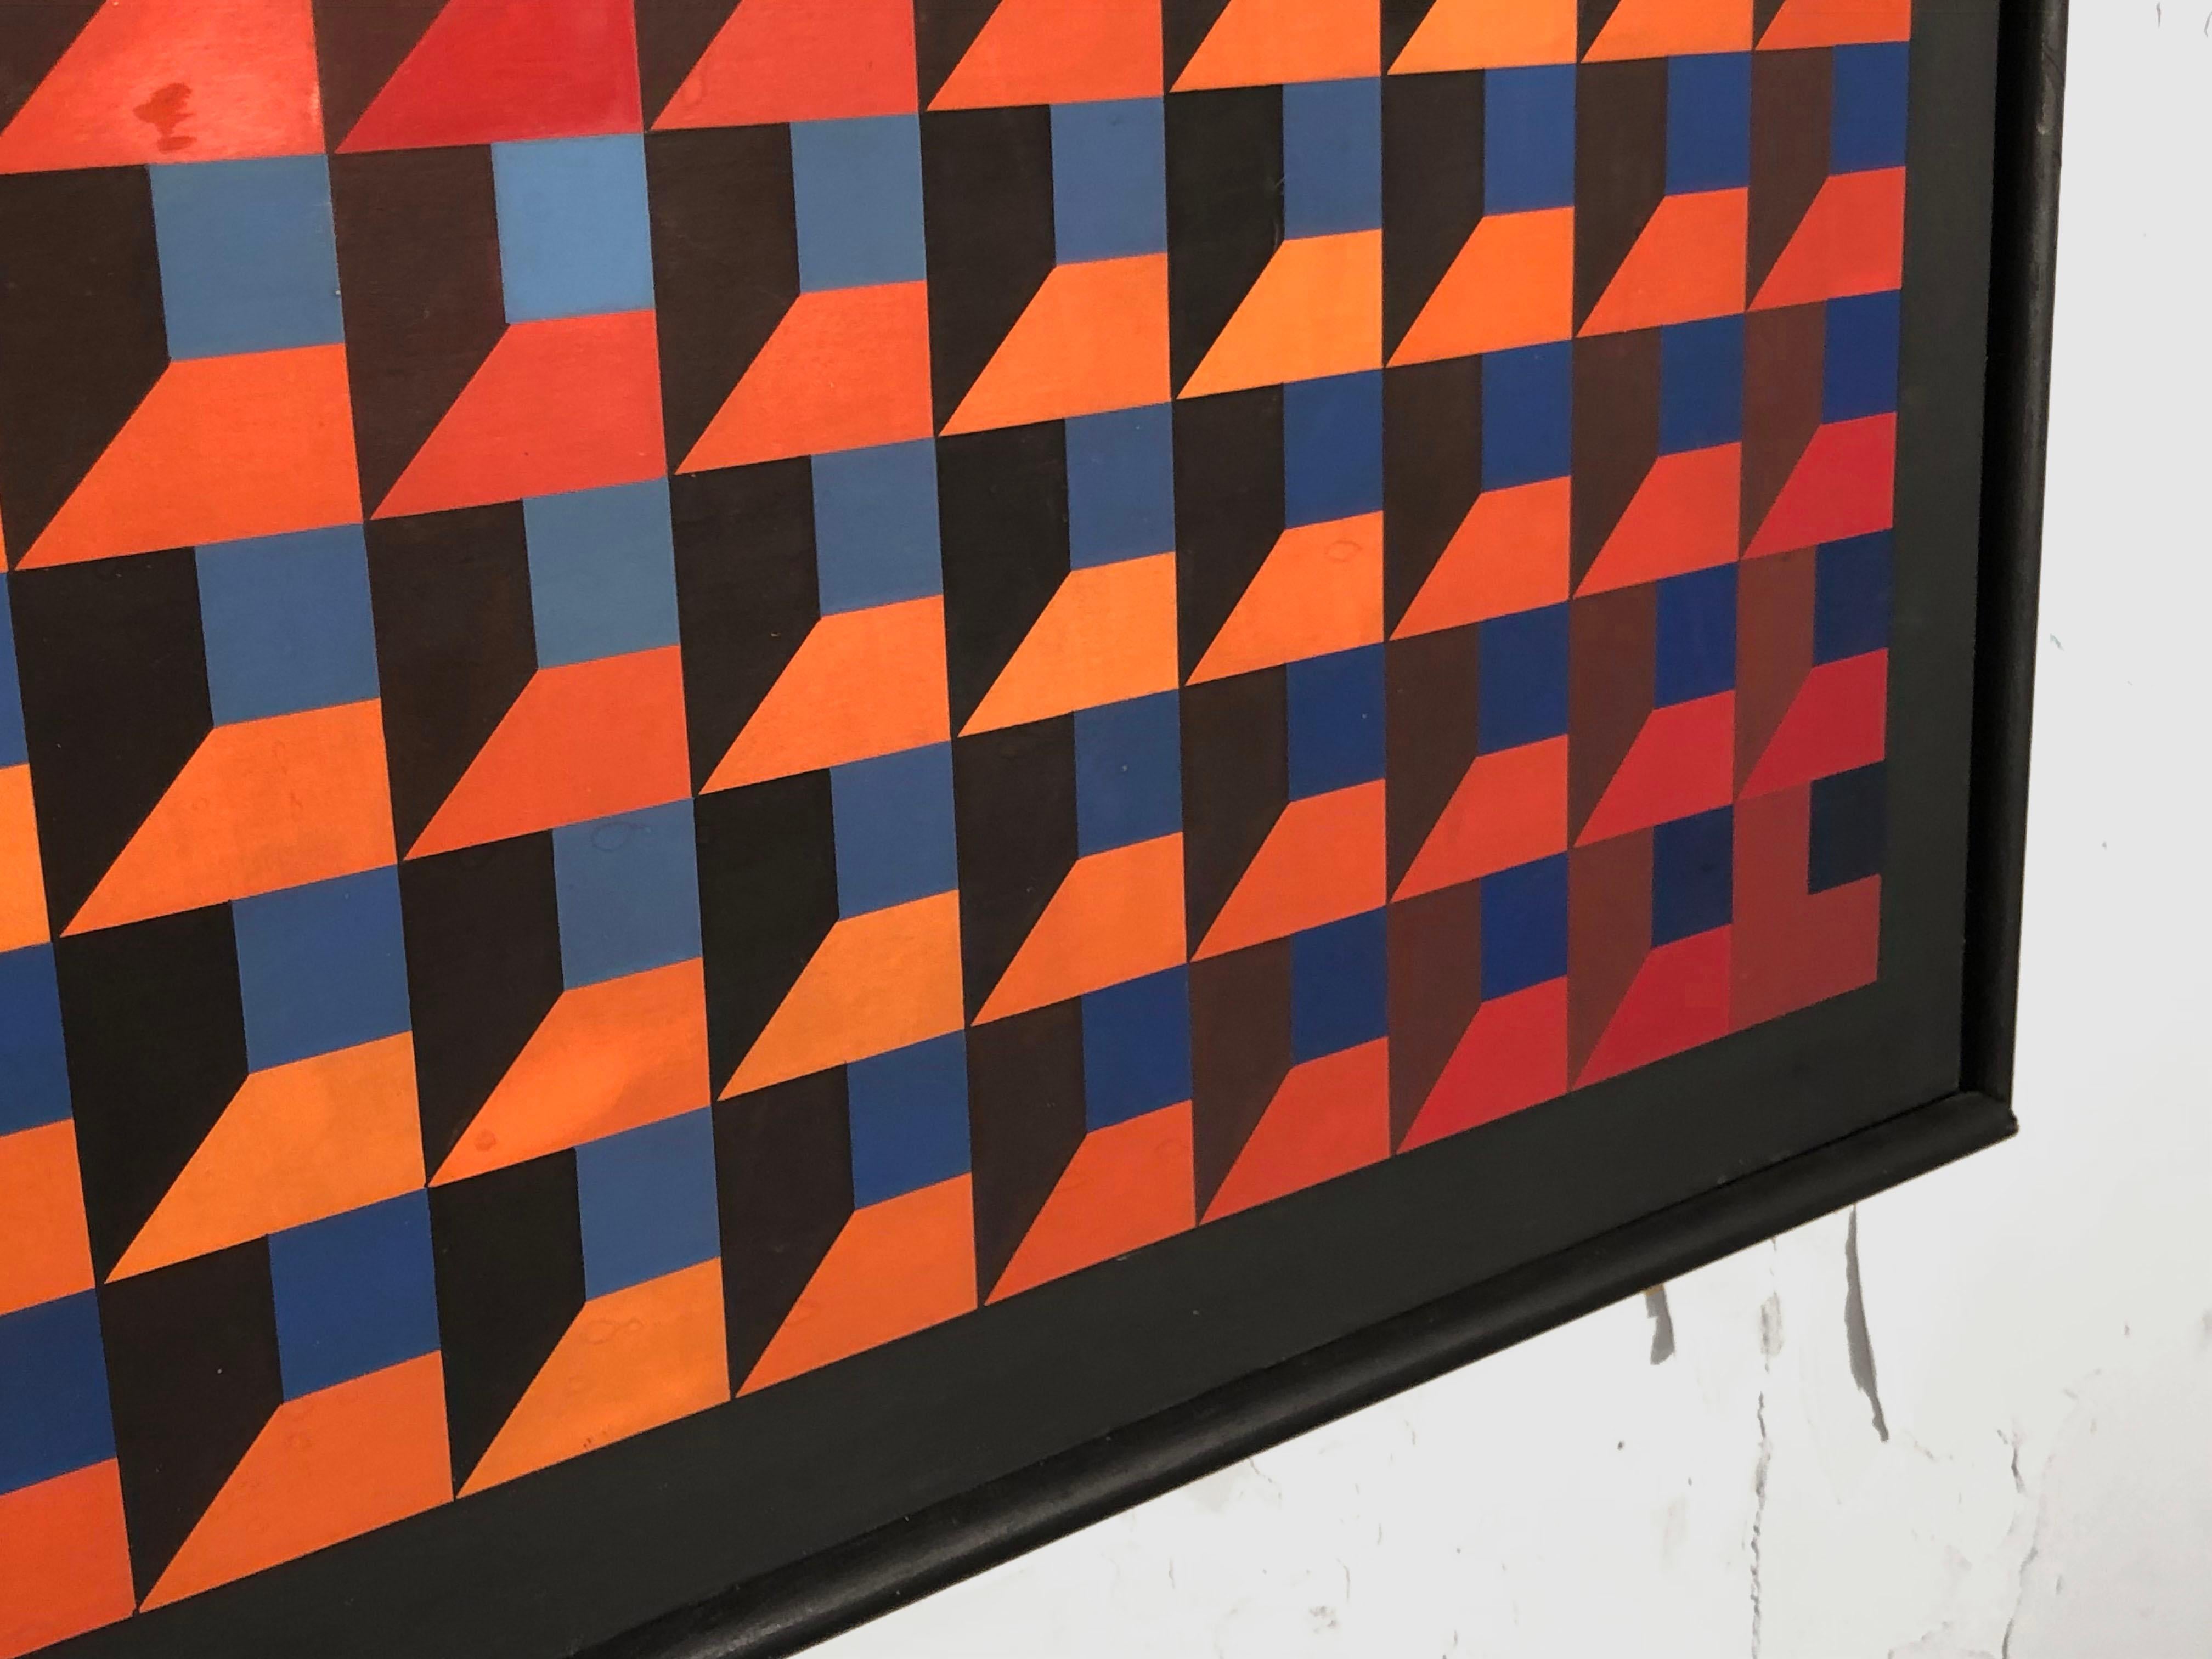 European An OP-ART KINETIC PAINTING on Panel by JEAN-PIERRE YVARAL VASARELY, France 1968 For Sale